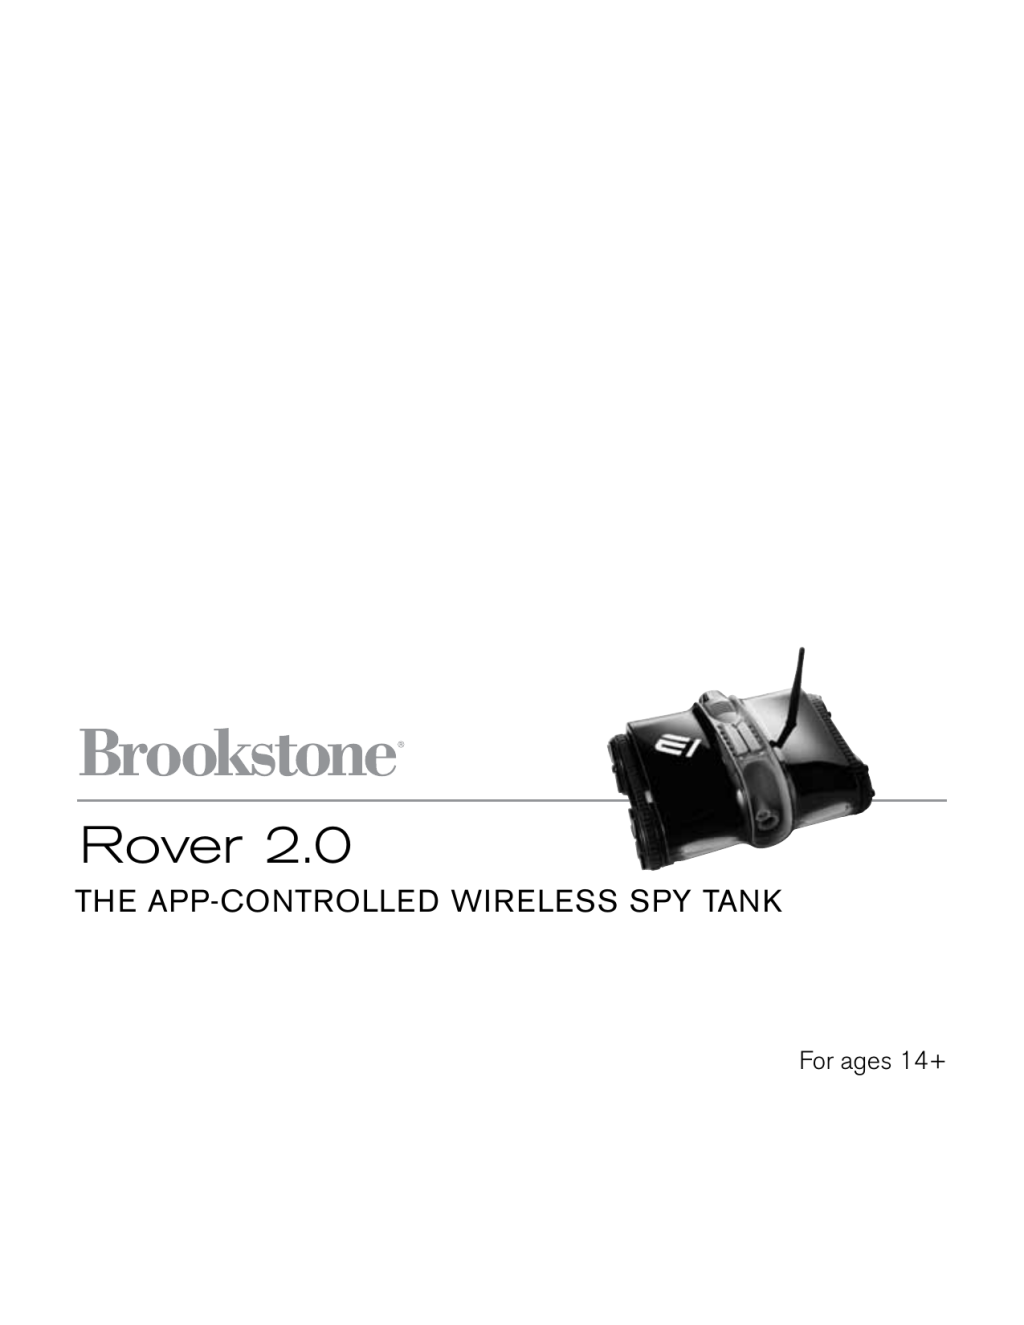 Picture of: Brookstone Rover